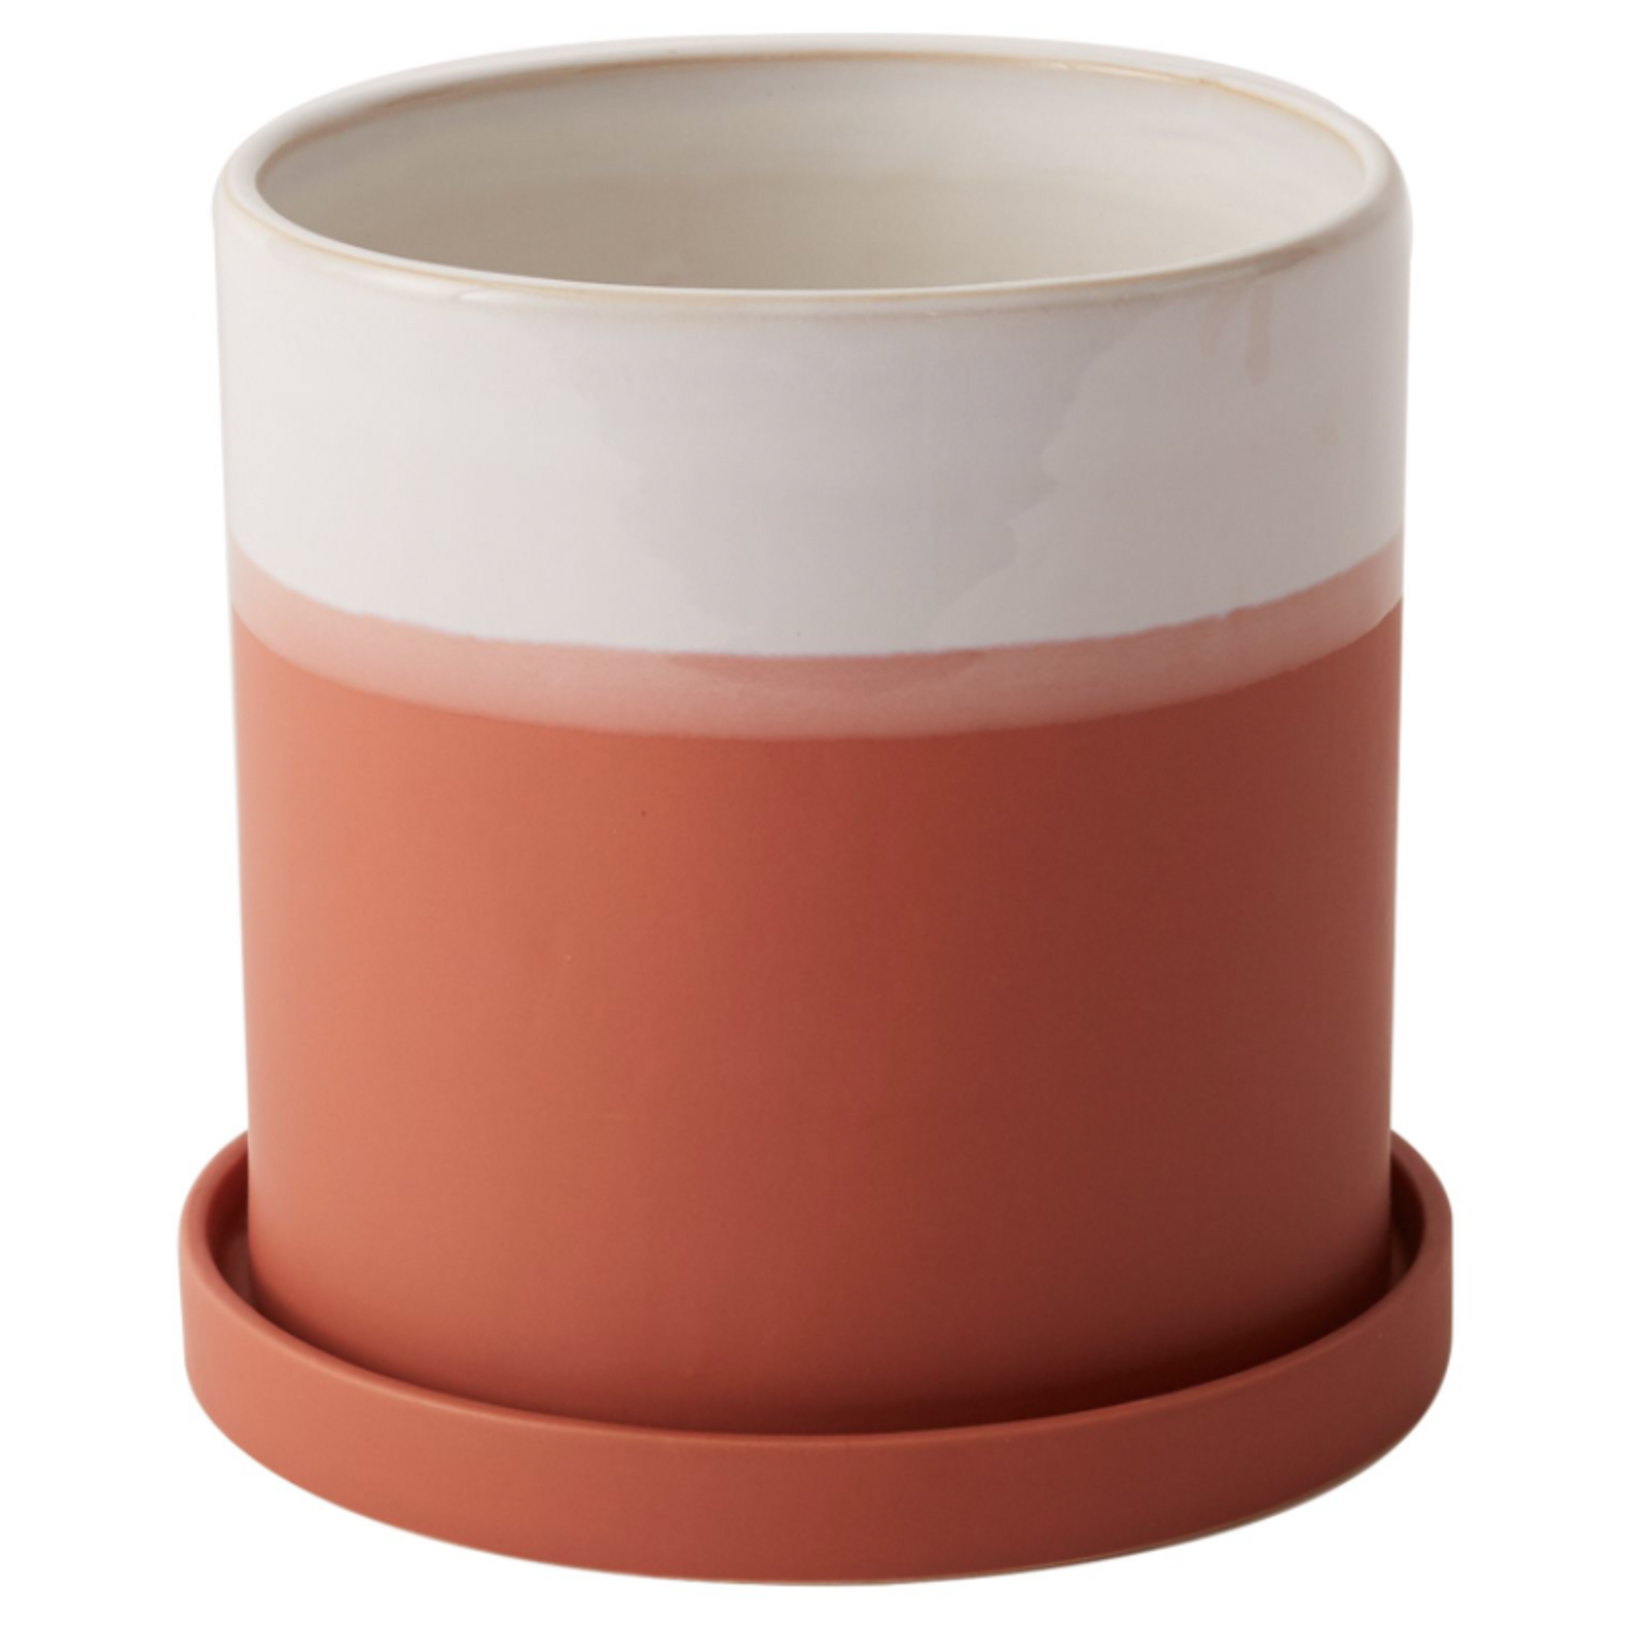 50% OFF WAS $16.49 NOW $8.25, 6”H X 6.25” TERRACOTTA HADLEY POT (AD)